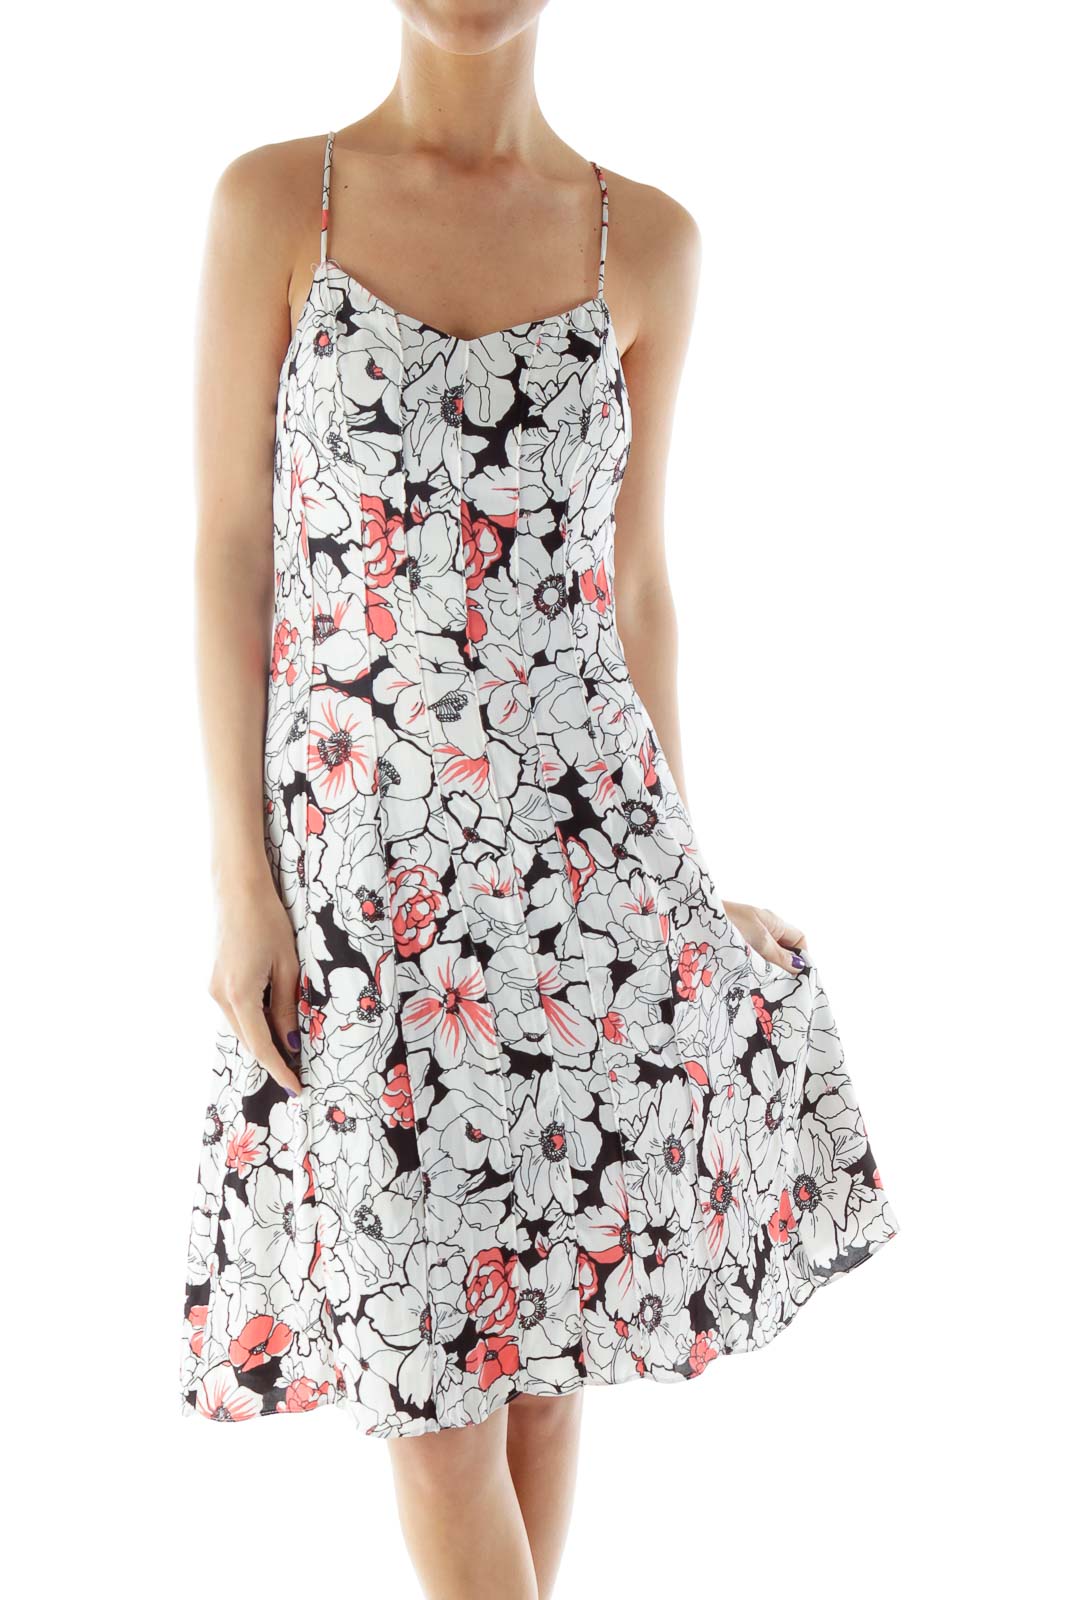 White, Black and Pink Floral Day Dress Front